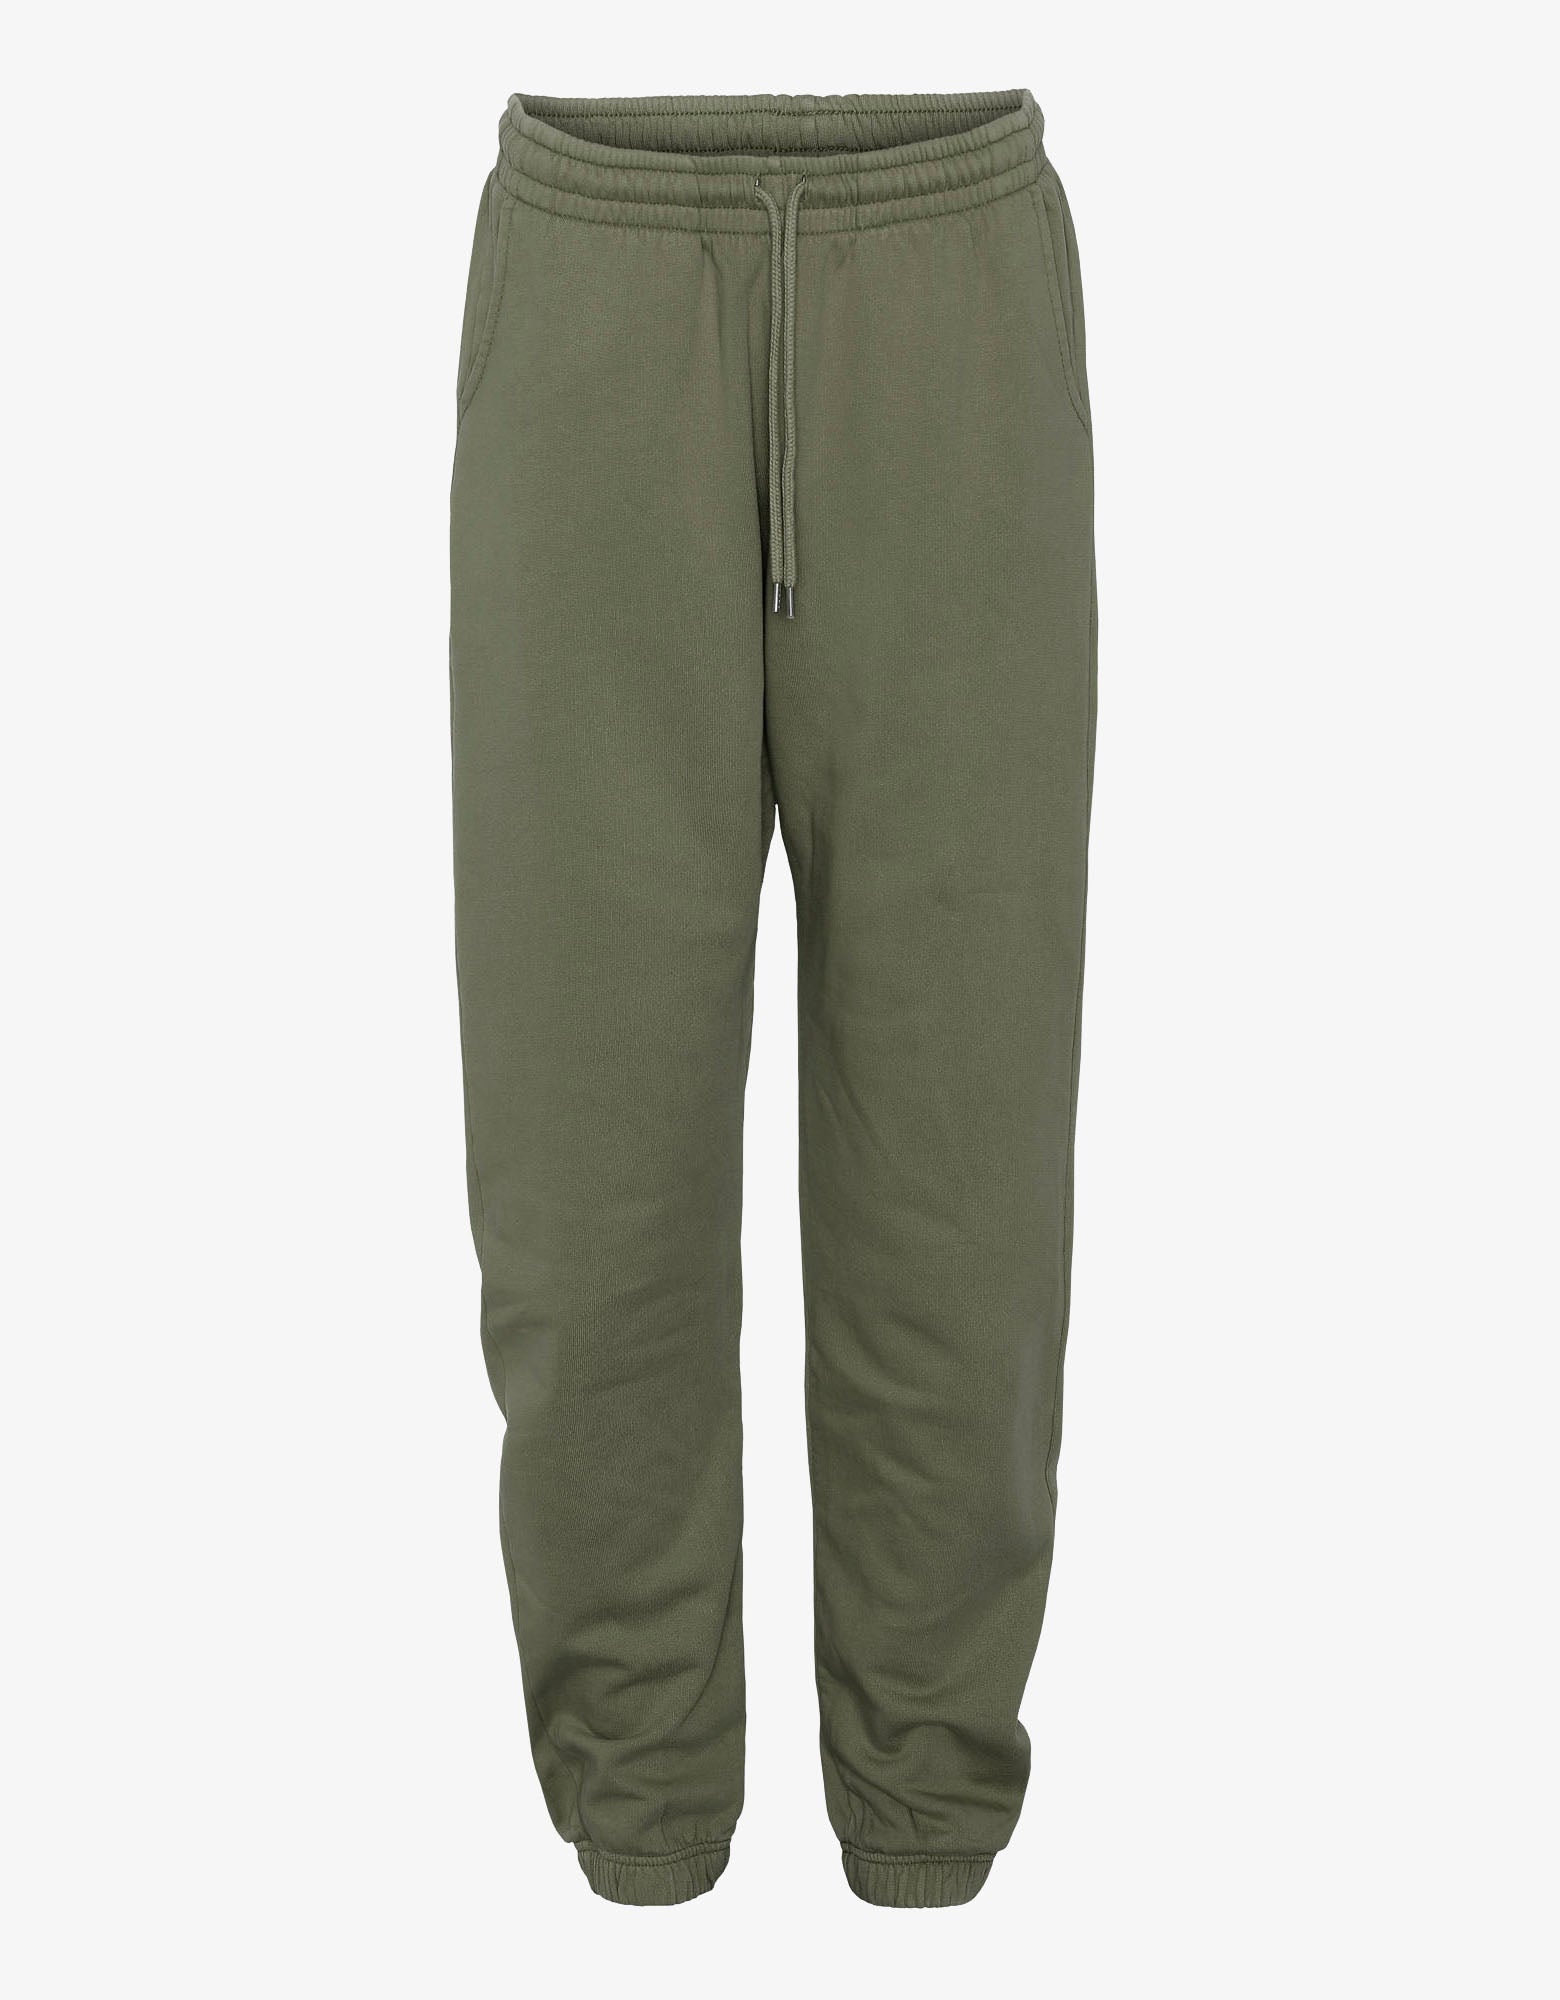 Colorful Standard Twill Pants (Organic) - Dusty Olive Green – URBAN EXCESS